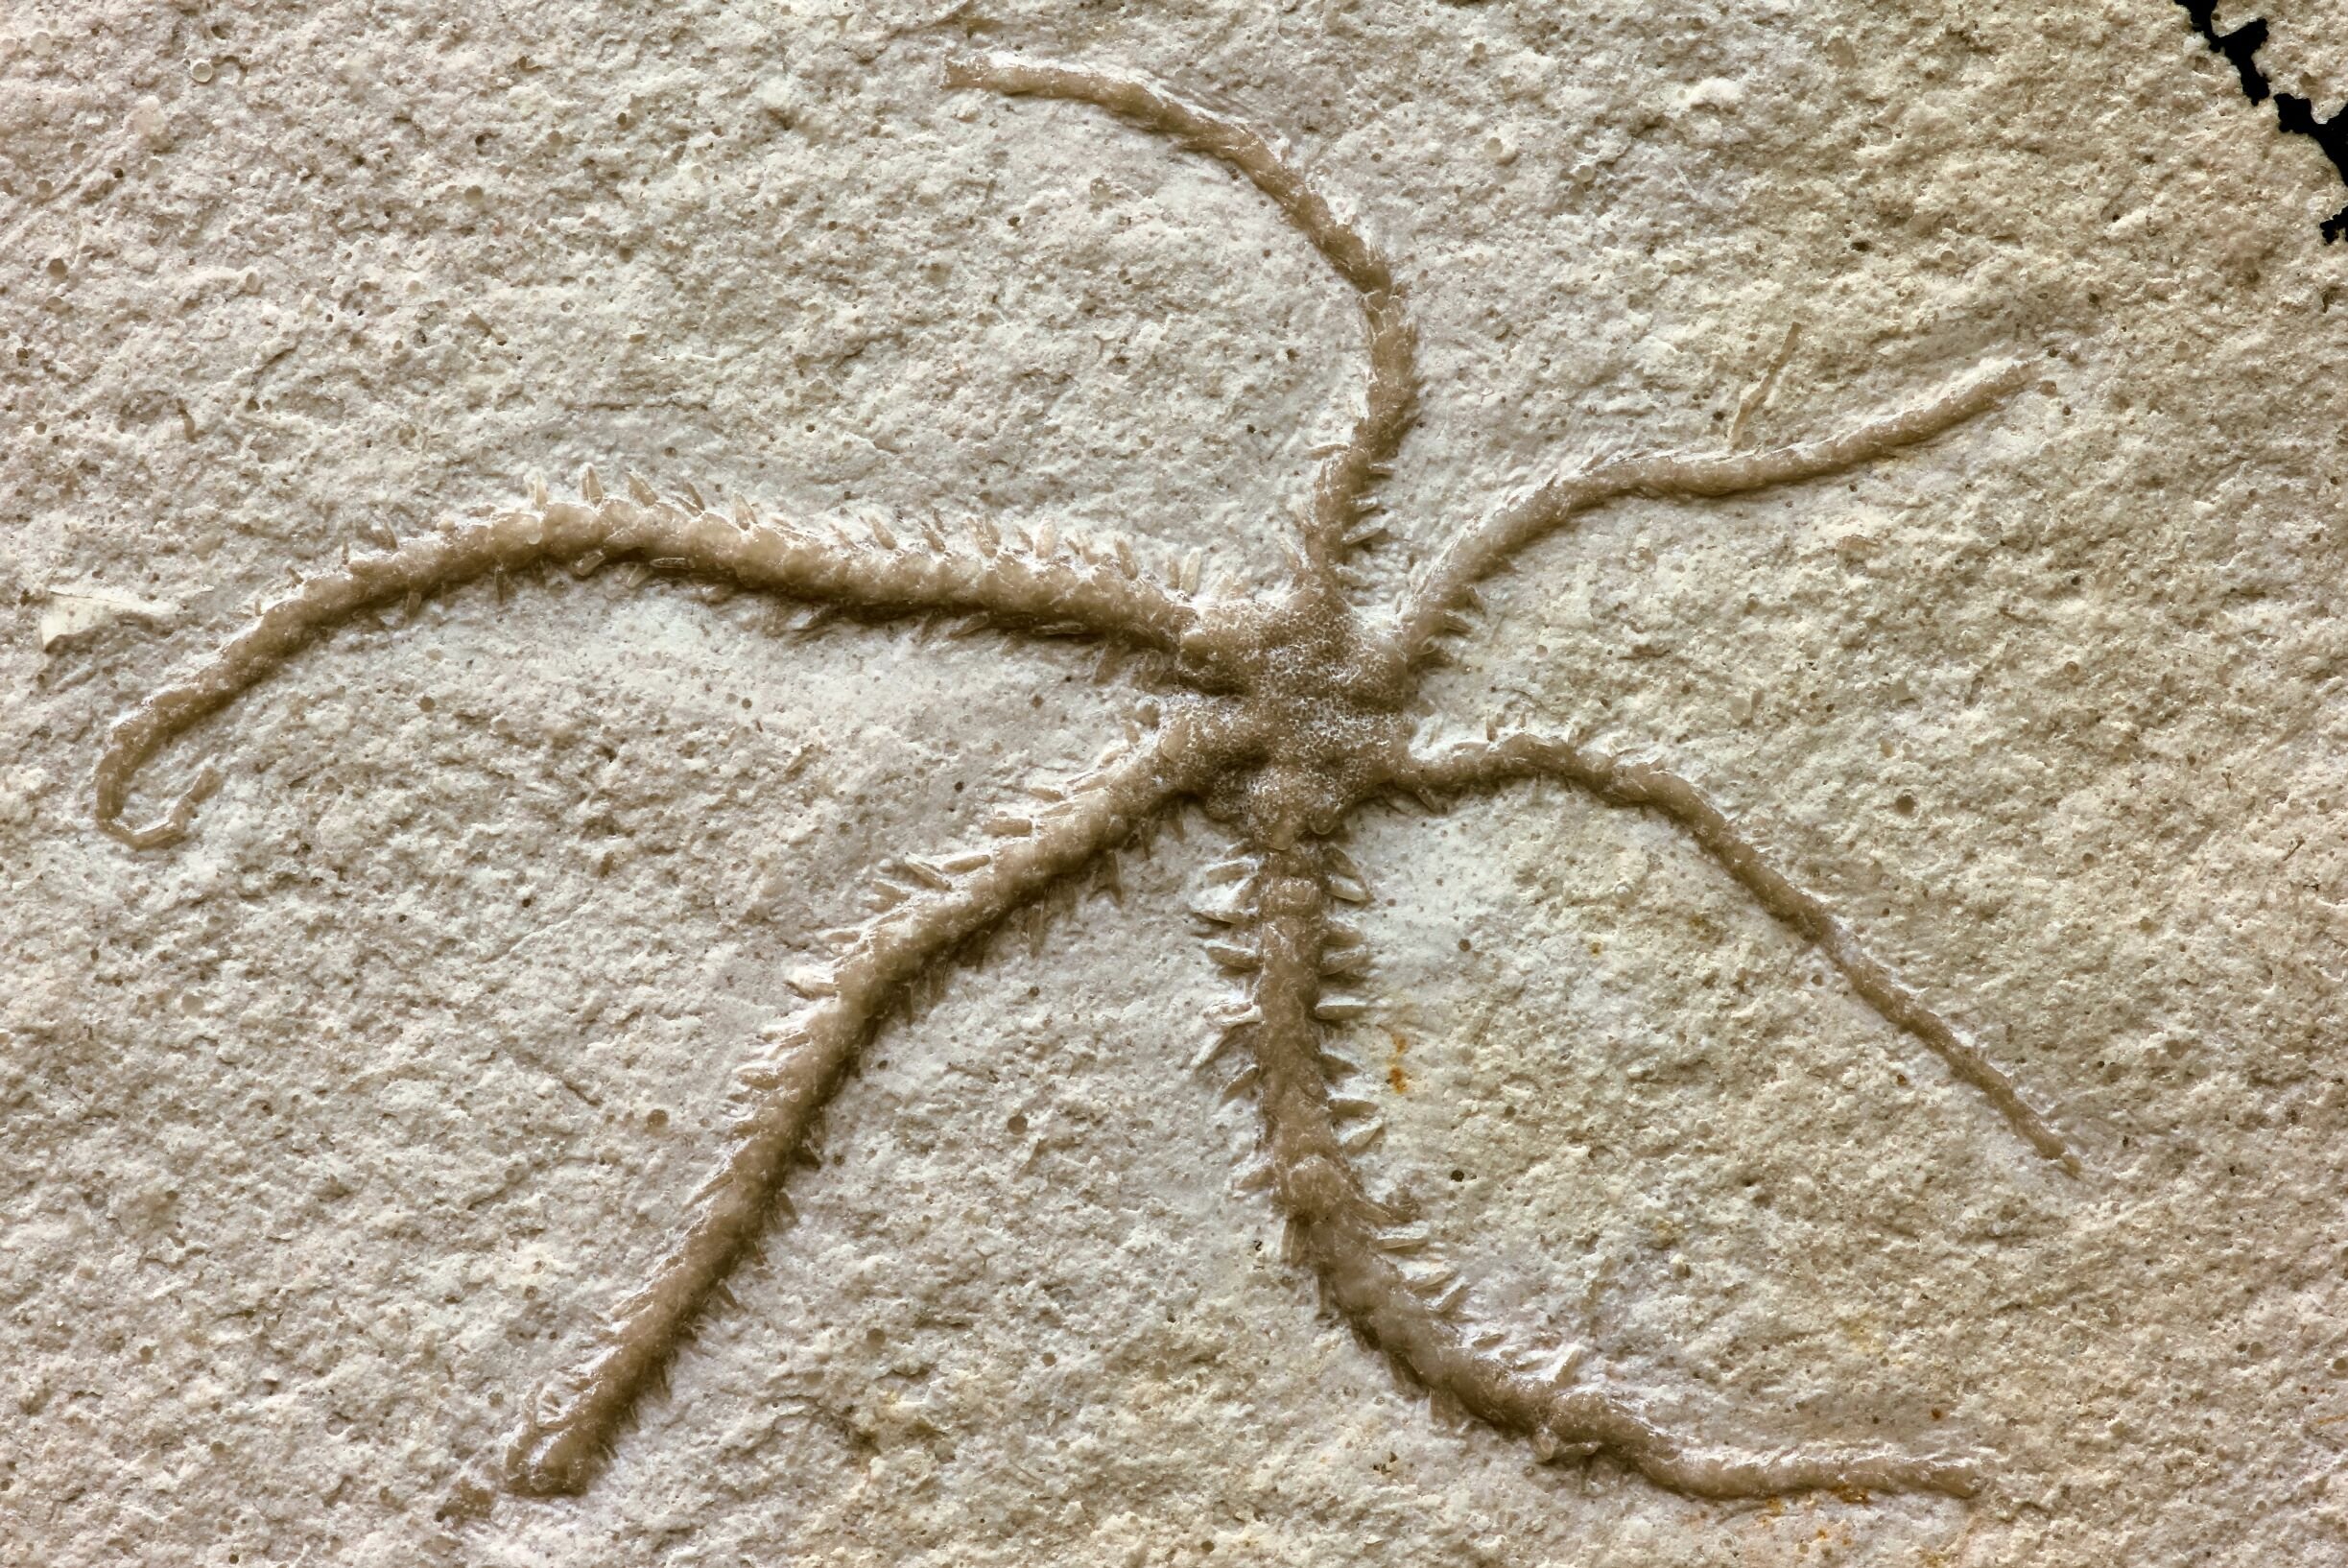 photo of Fossil found in Germany shows starfish relative engaged in clonal fragmentation 150 million years ago image